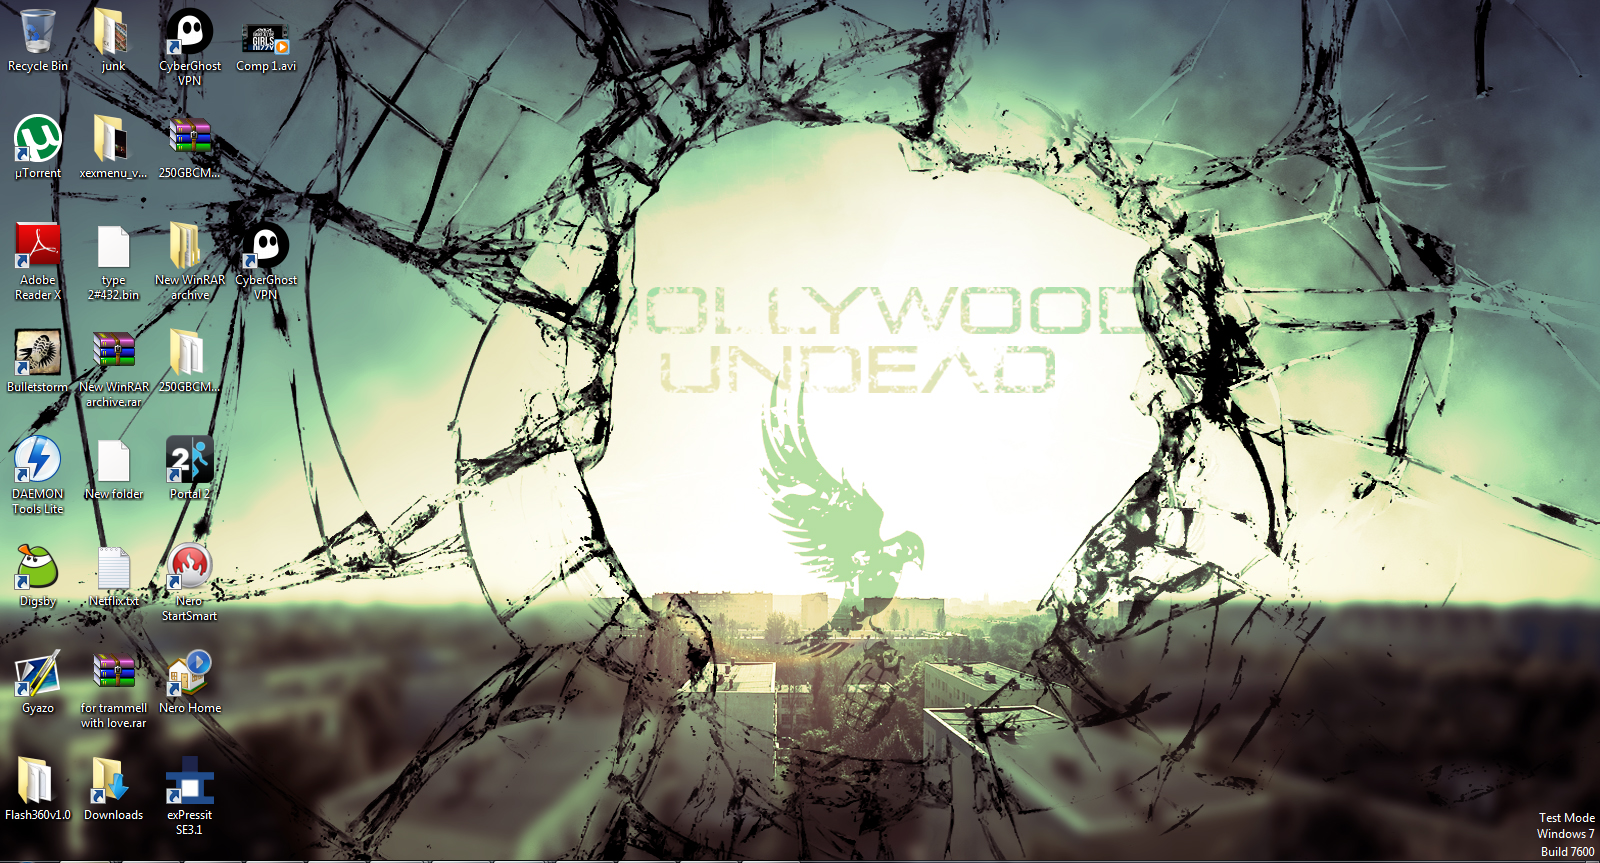 Hollywood Undead Wallpaper By Weletobloodstone HD Walls Find